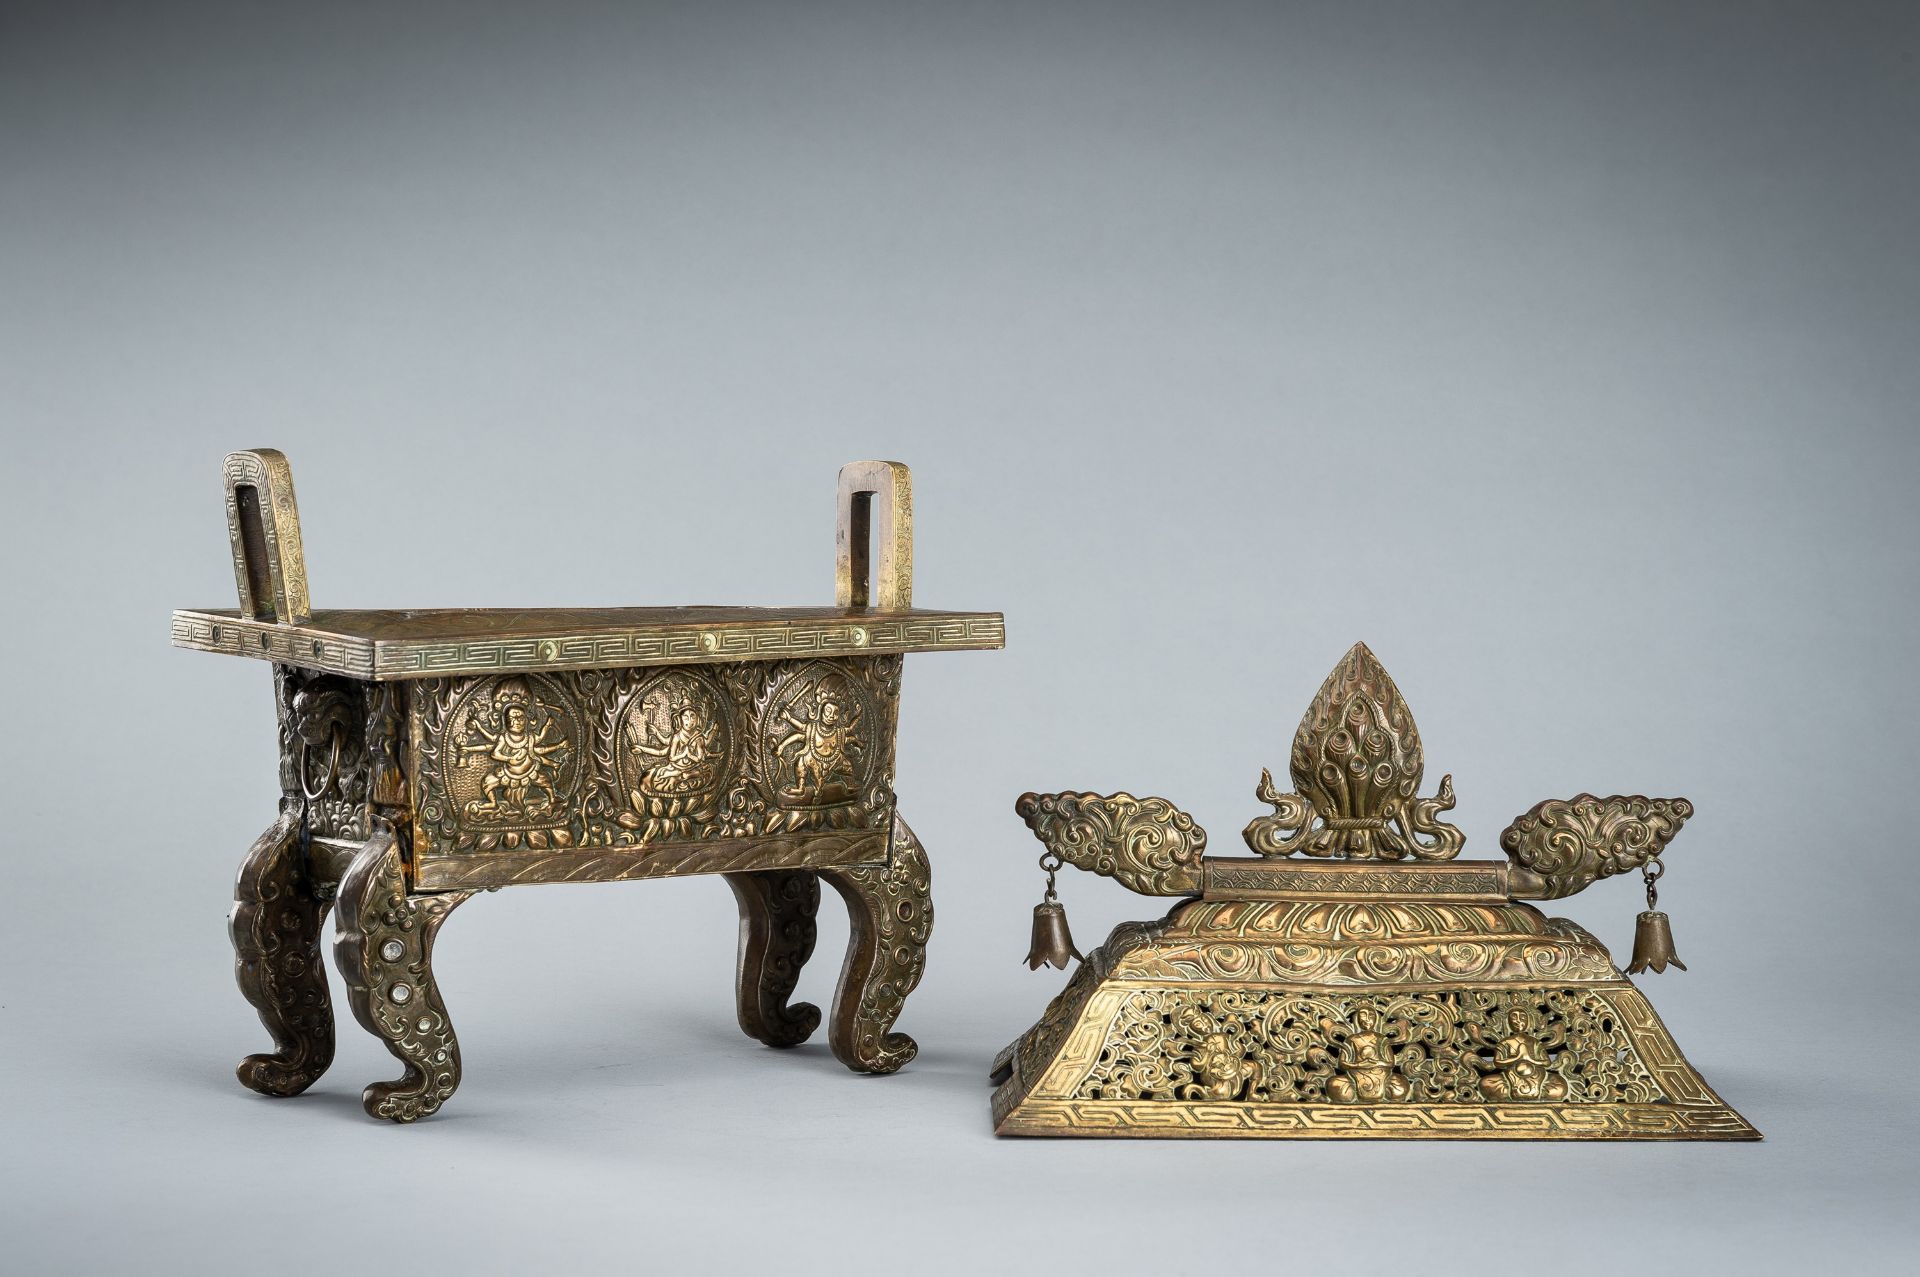 A GILT COPPER REPOUSSE CENSER AND RETICULATED COVER, FANGDING, QING DYNASTY - Image 14 of 20